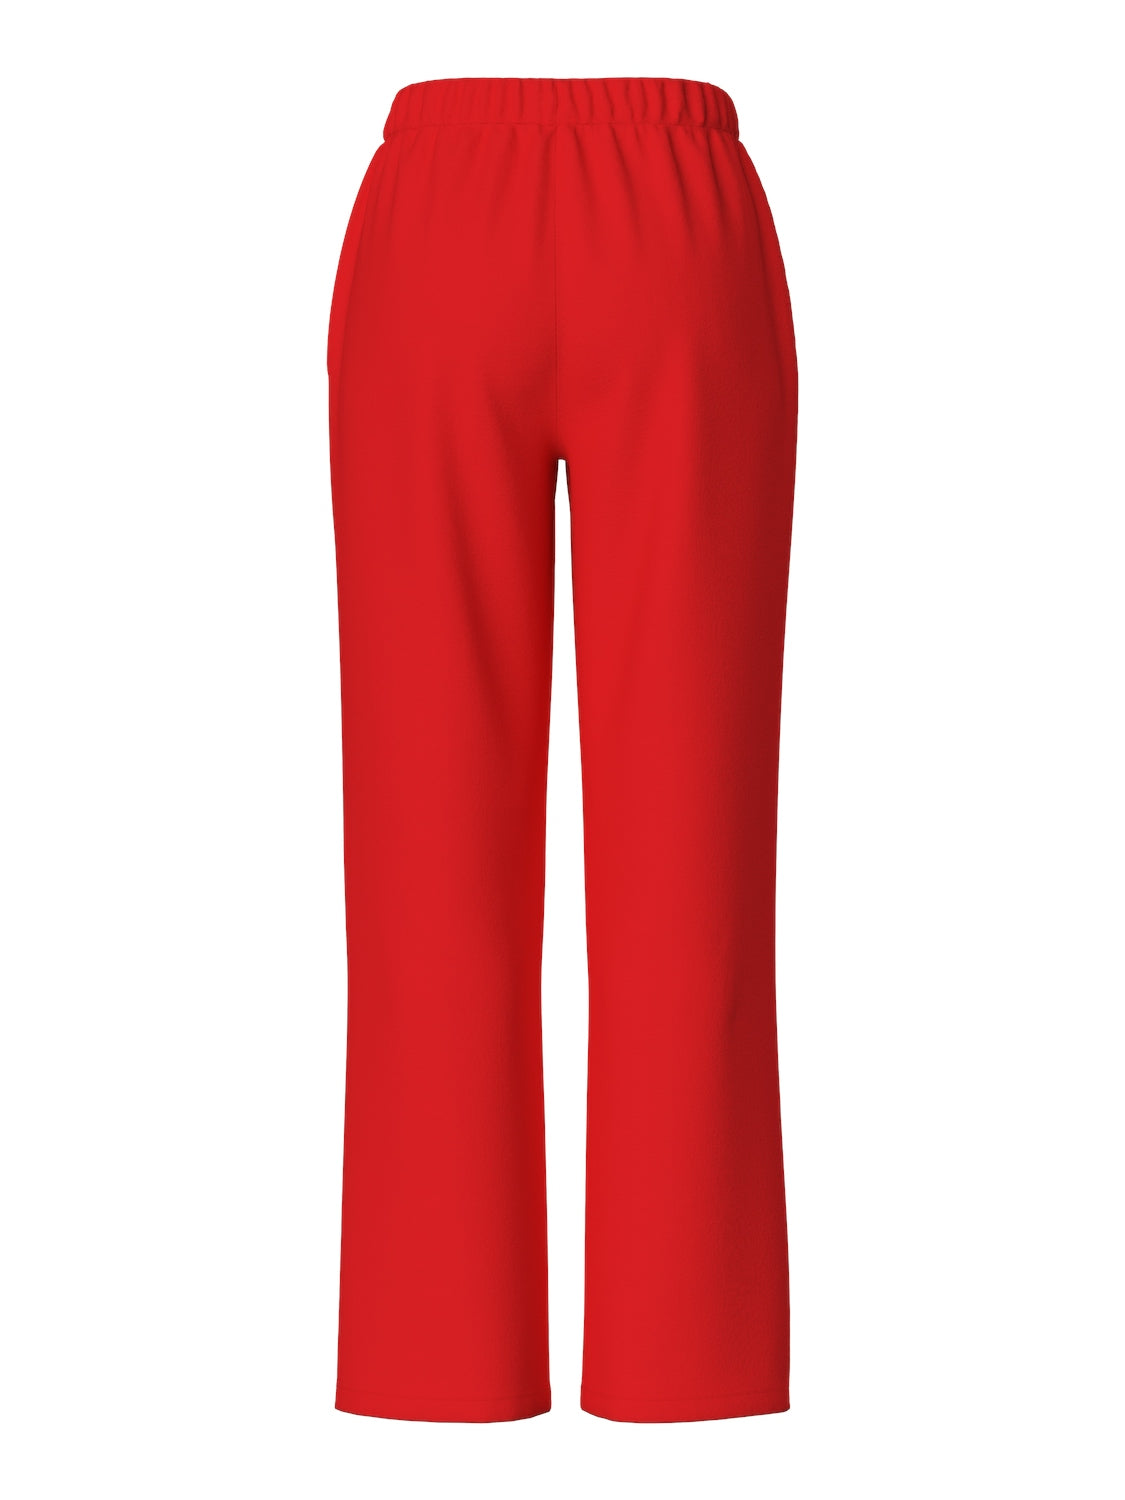 Pieces Chilli Summer Wide Sweat Pants, Red